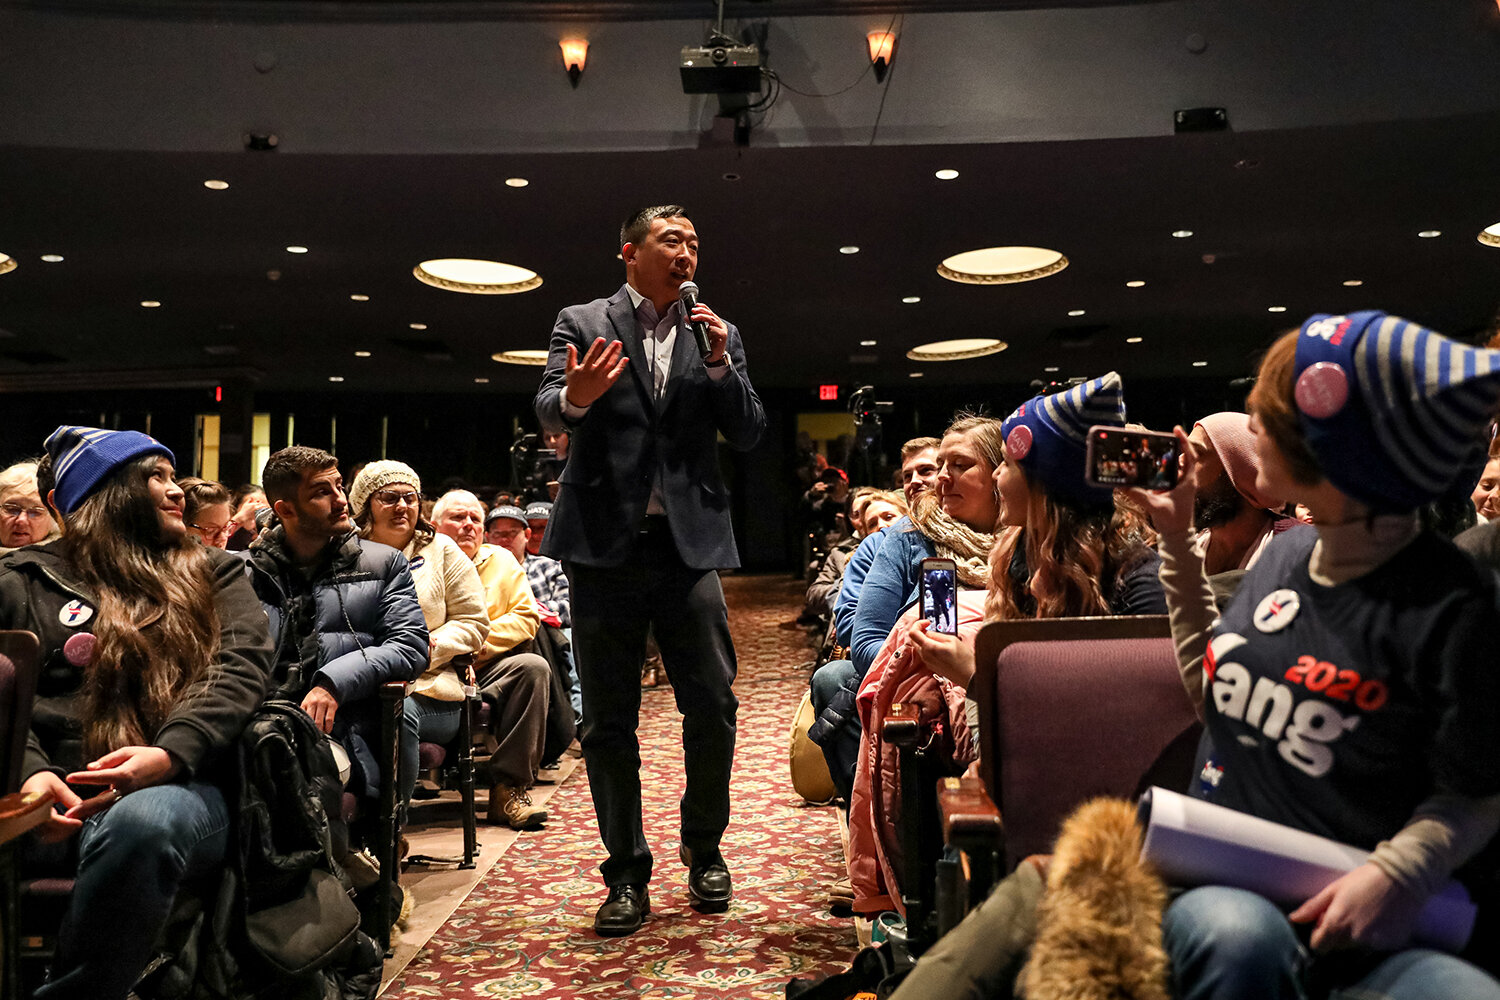  Democratic Presidential Candidate Andrew Yang addresses the crowd during a campaign rally at the Englert Theatre in Iowa City, IA on Saturday, Jan. 18, 2020. 